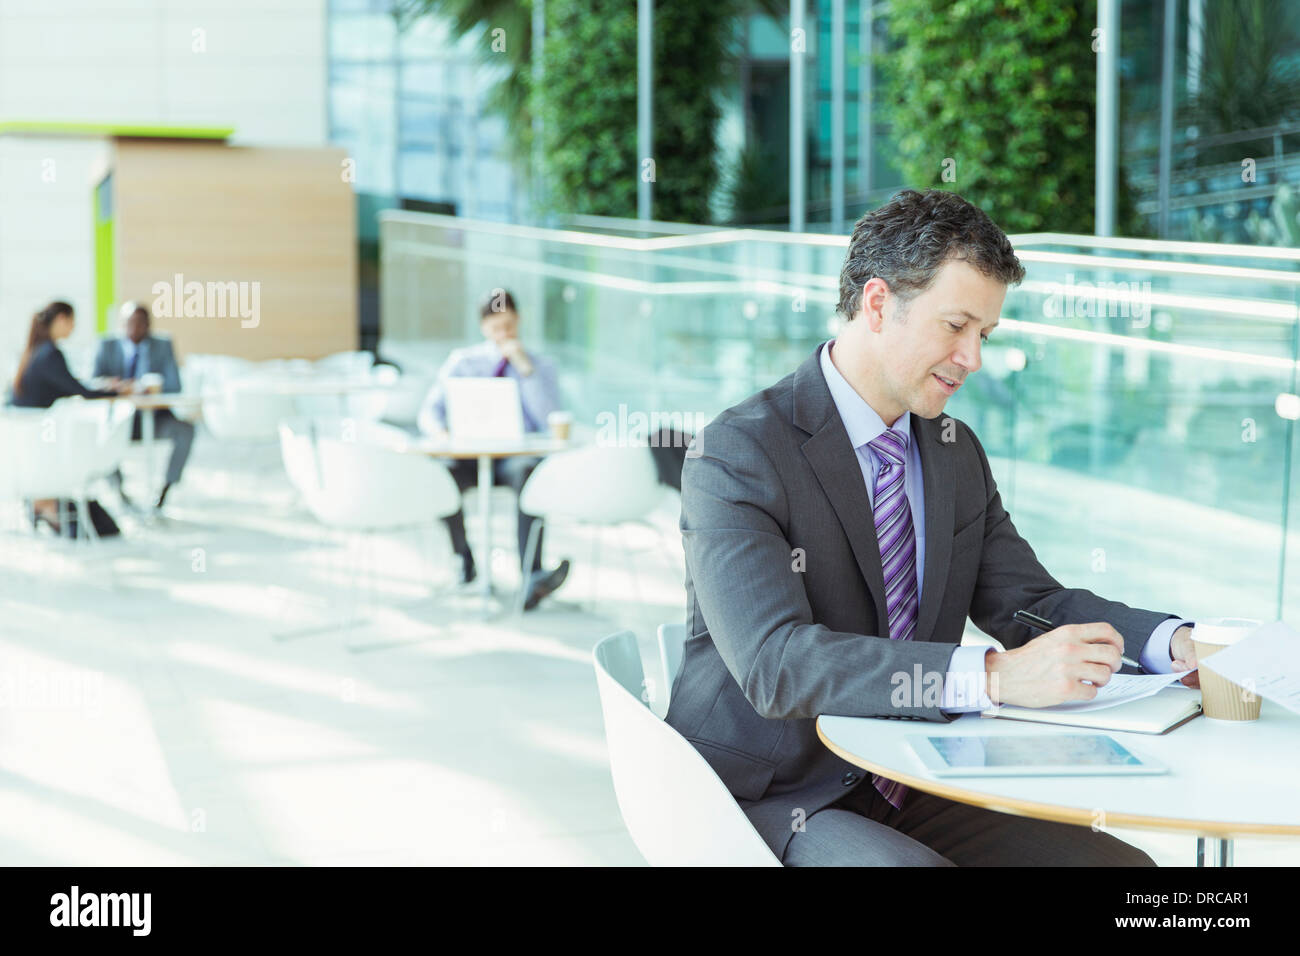 Businessman working in cafe Stock Photo